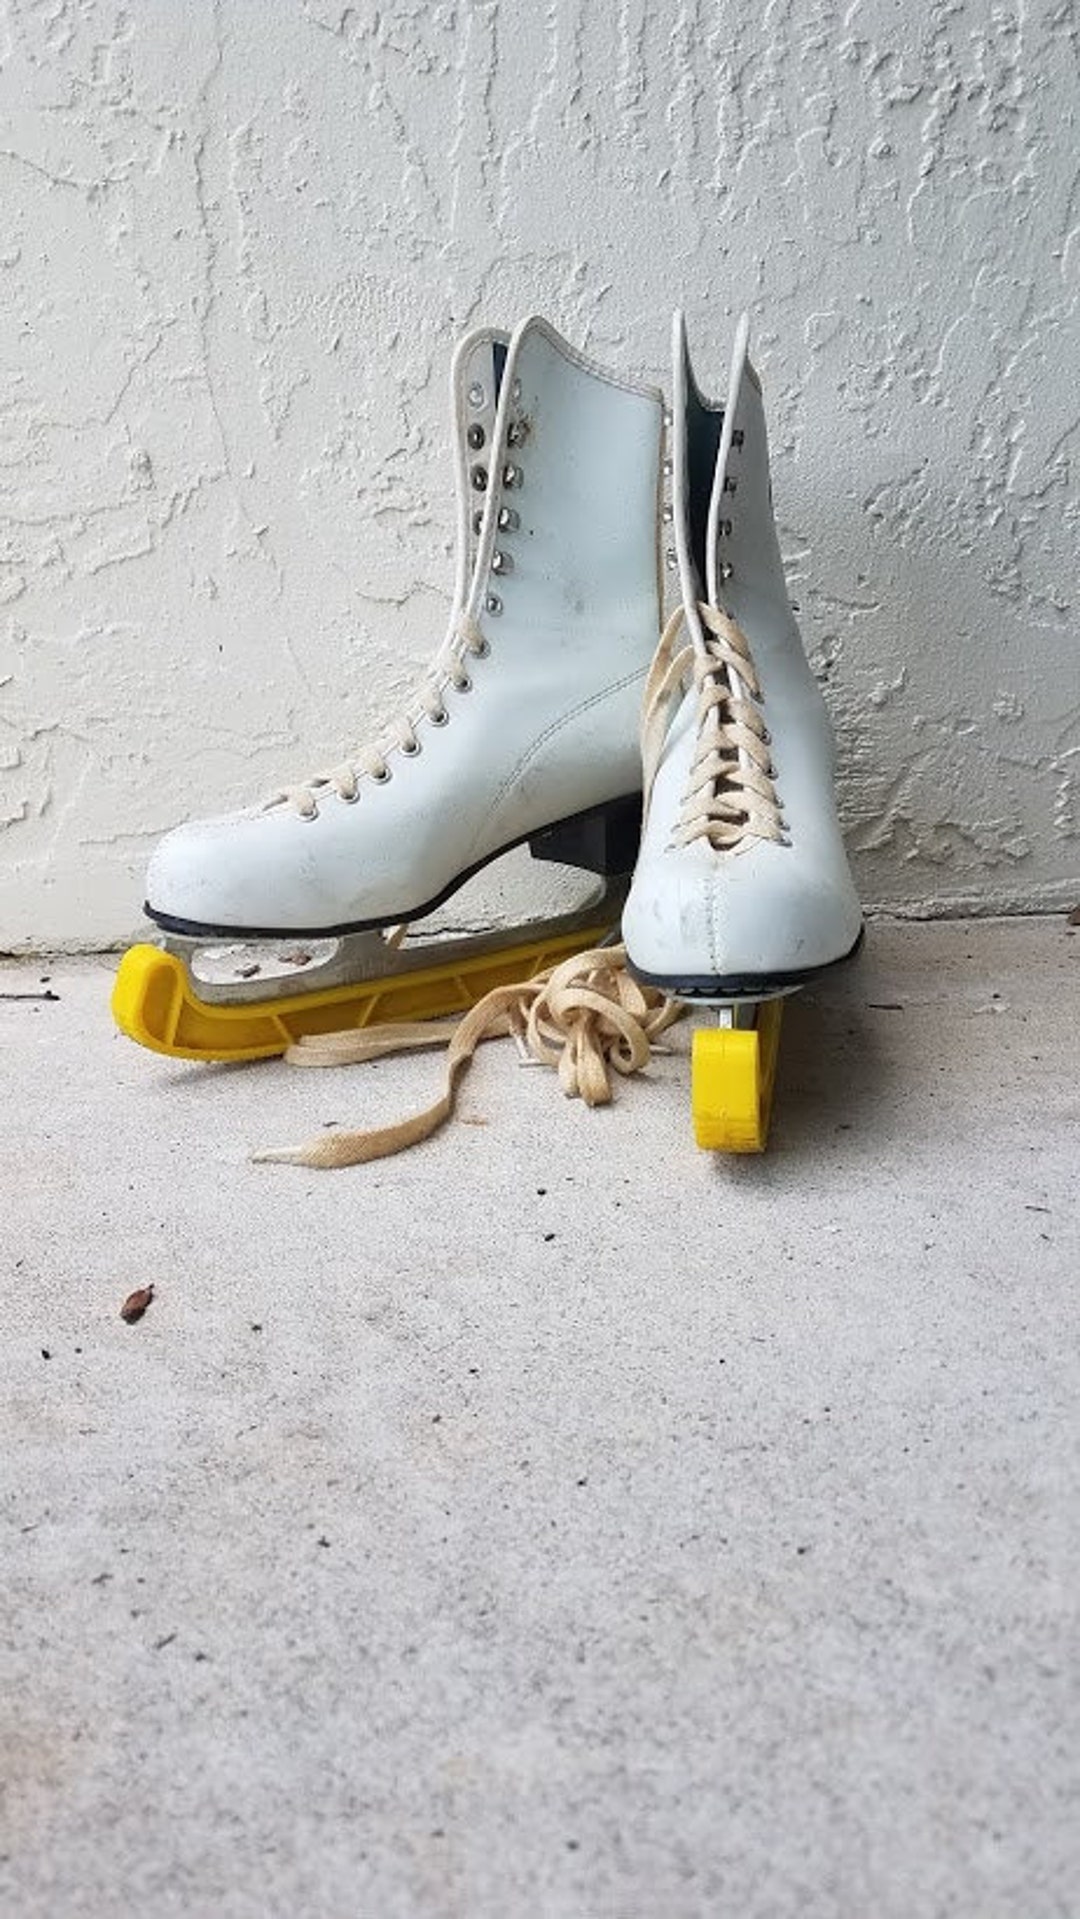 White Ice Skates Ready to Be Used by a Fireplace or on a Sled as a Prop for  Winter 